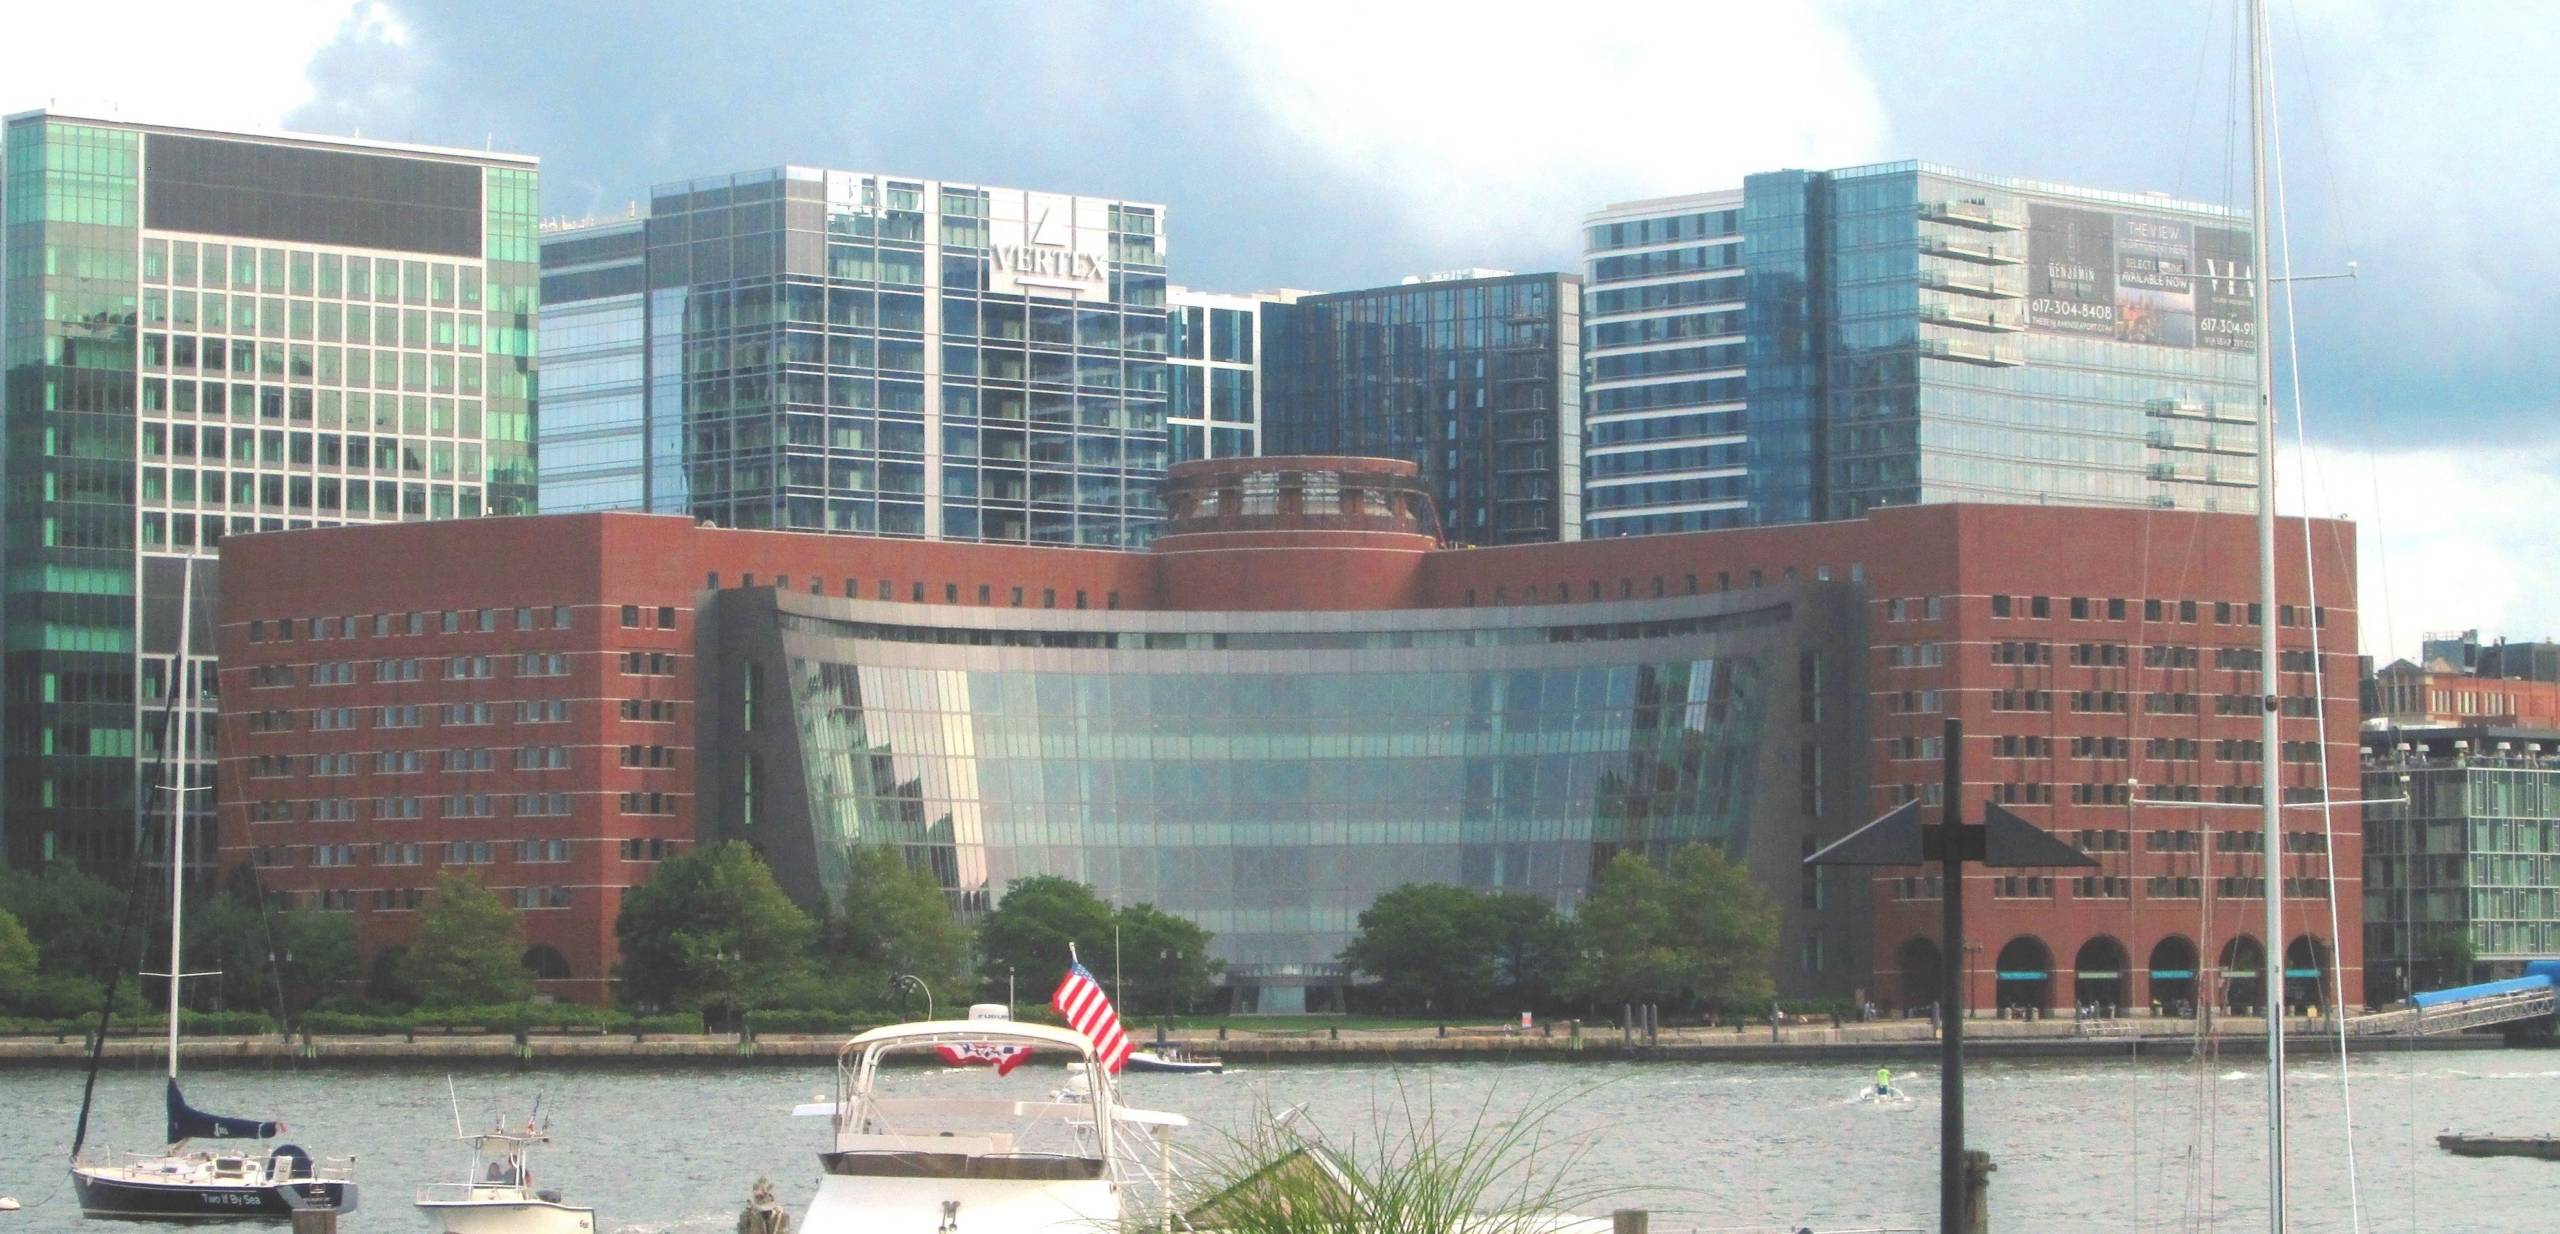 2017 Moakley US Courthouse from Central Wharf scaled